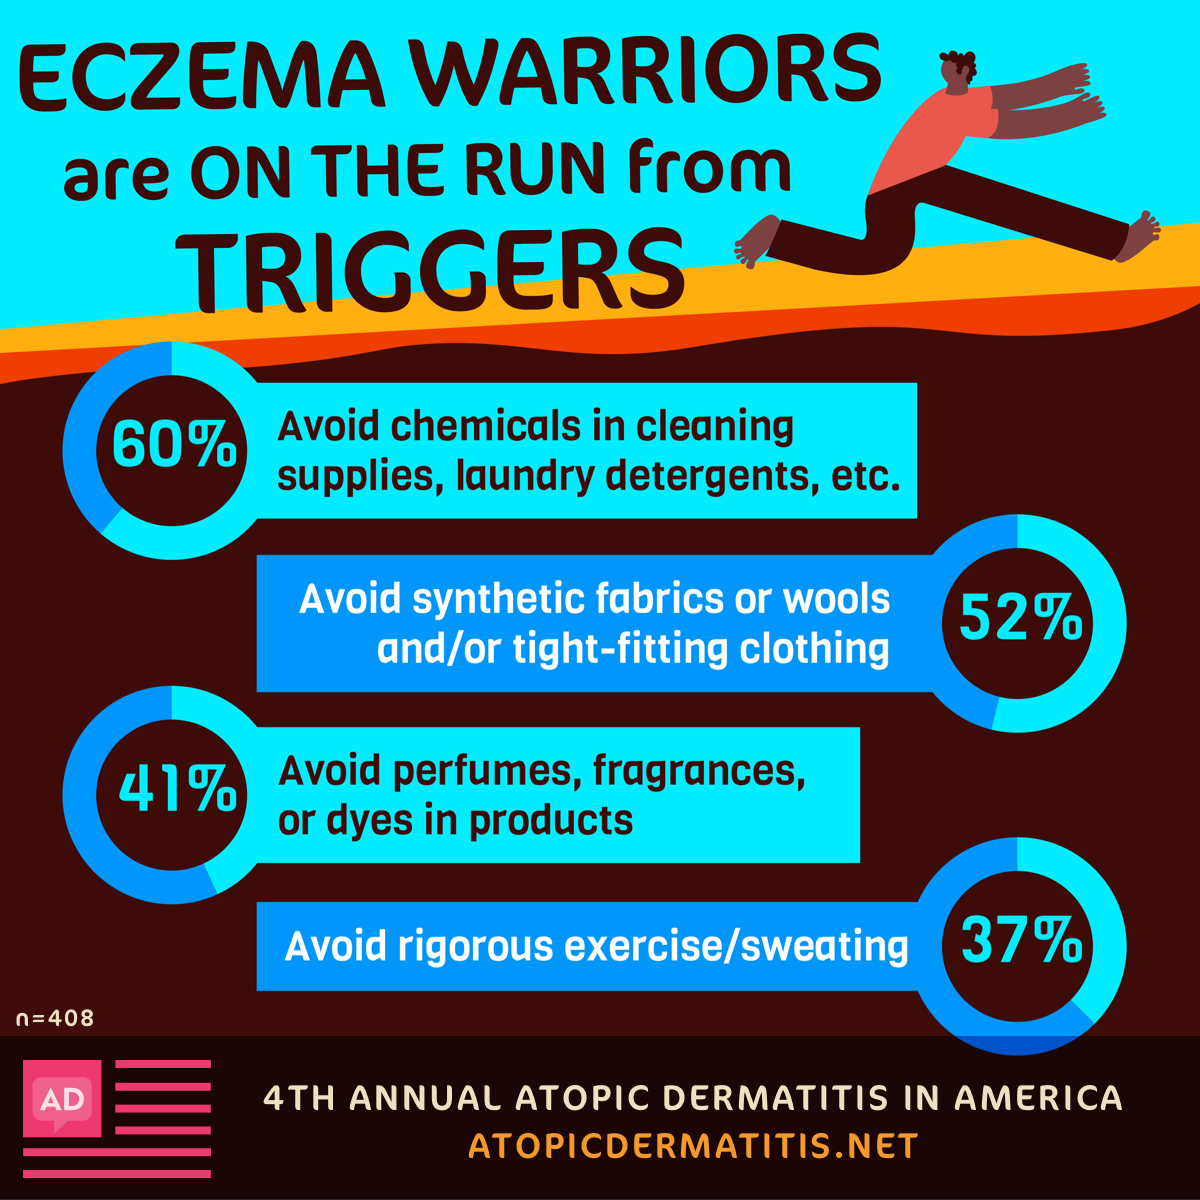 To avoid triggers, 60% of respondents avoid chemicals in various products, 52% avoid synthetic fabrics or wool, and 37% avoid exercise or sweat.